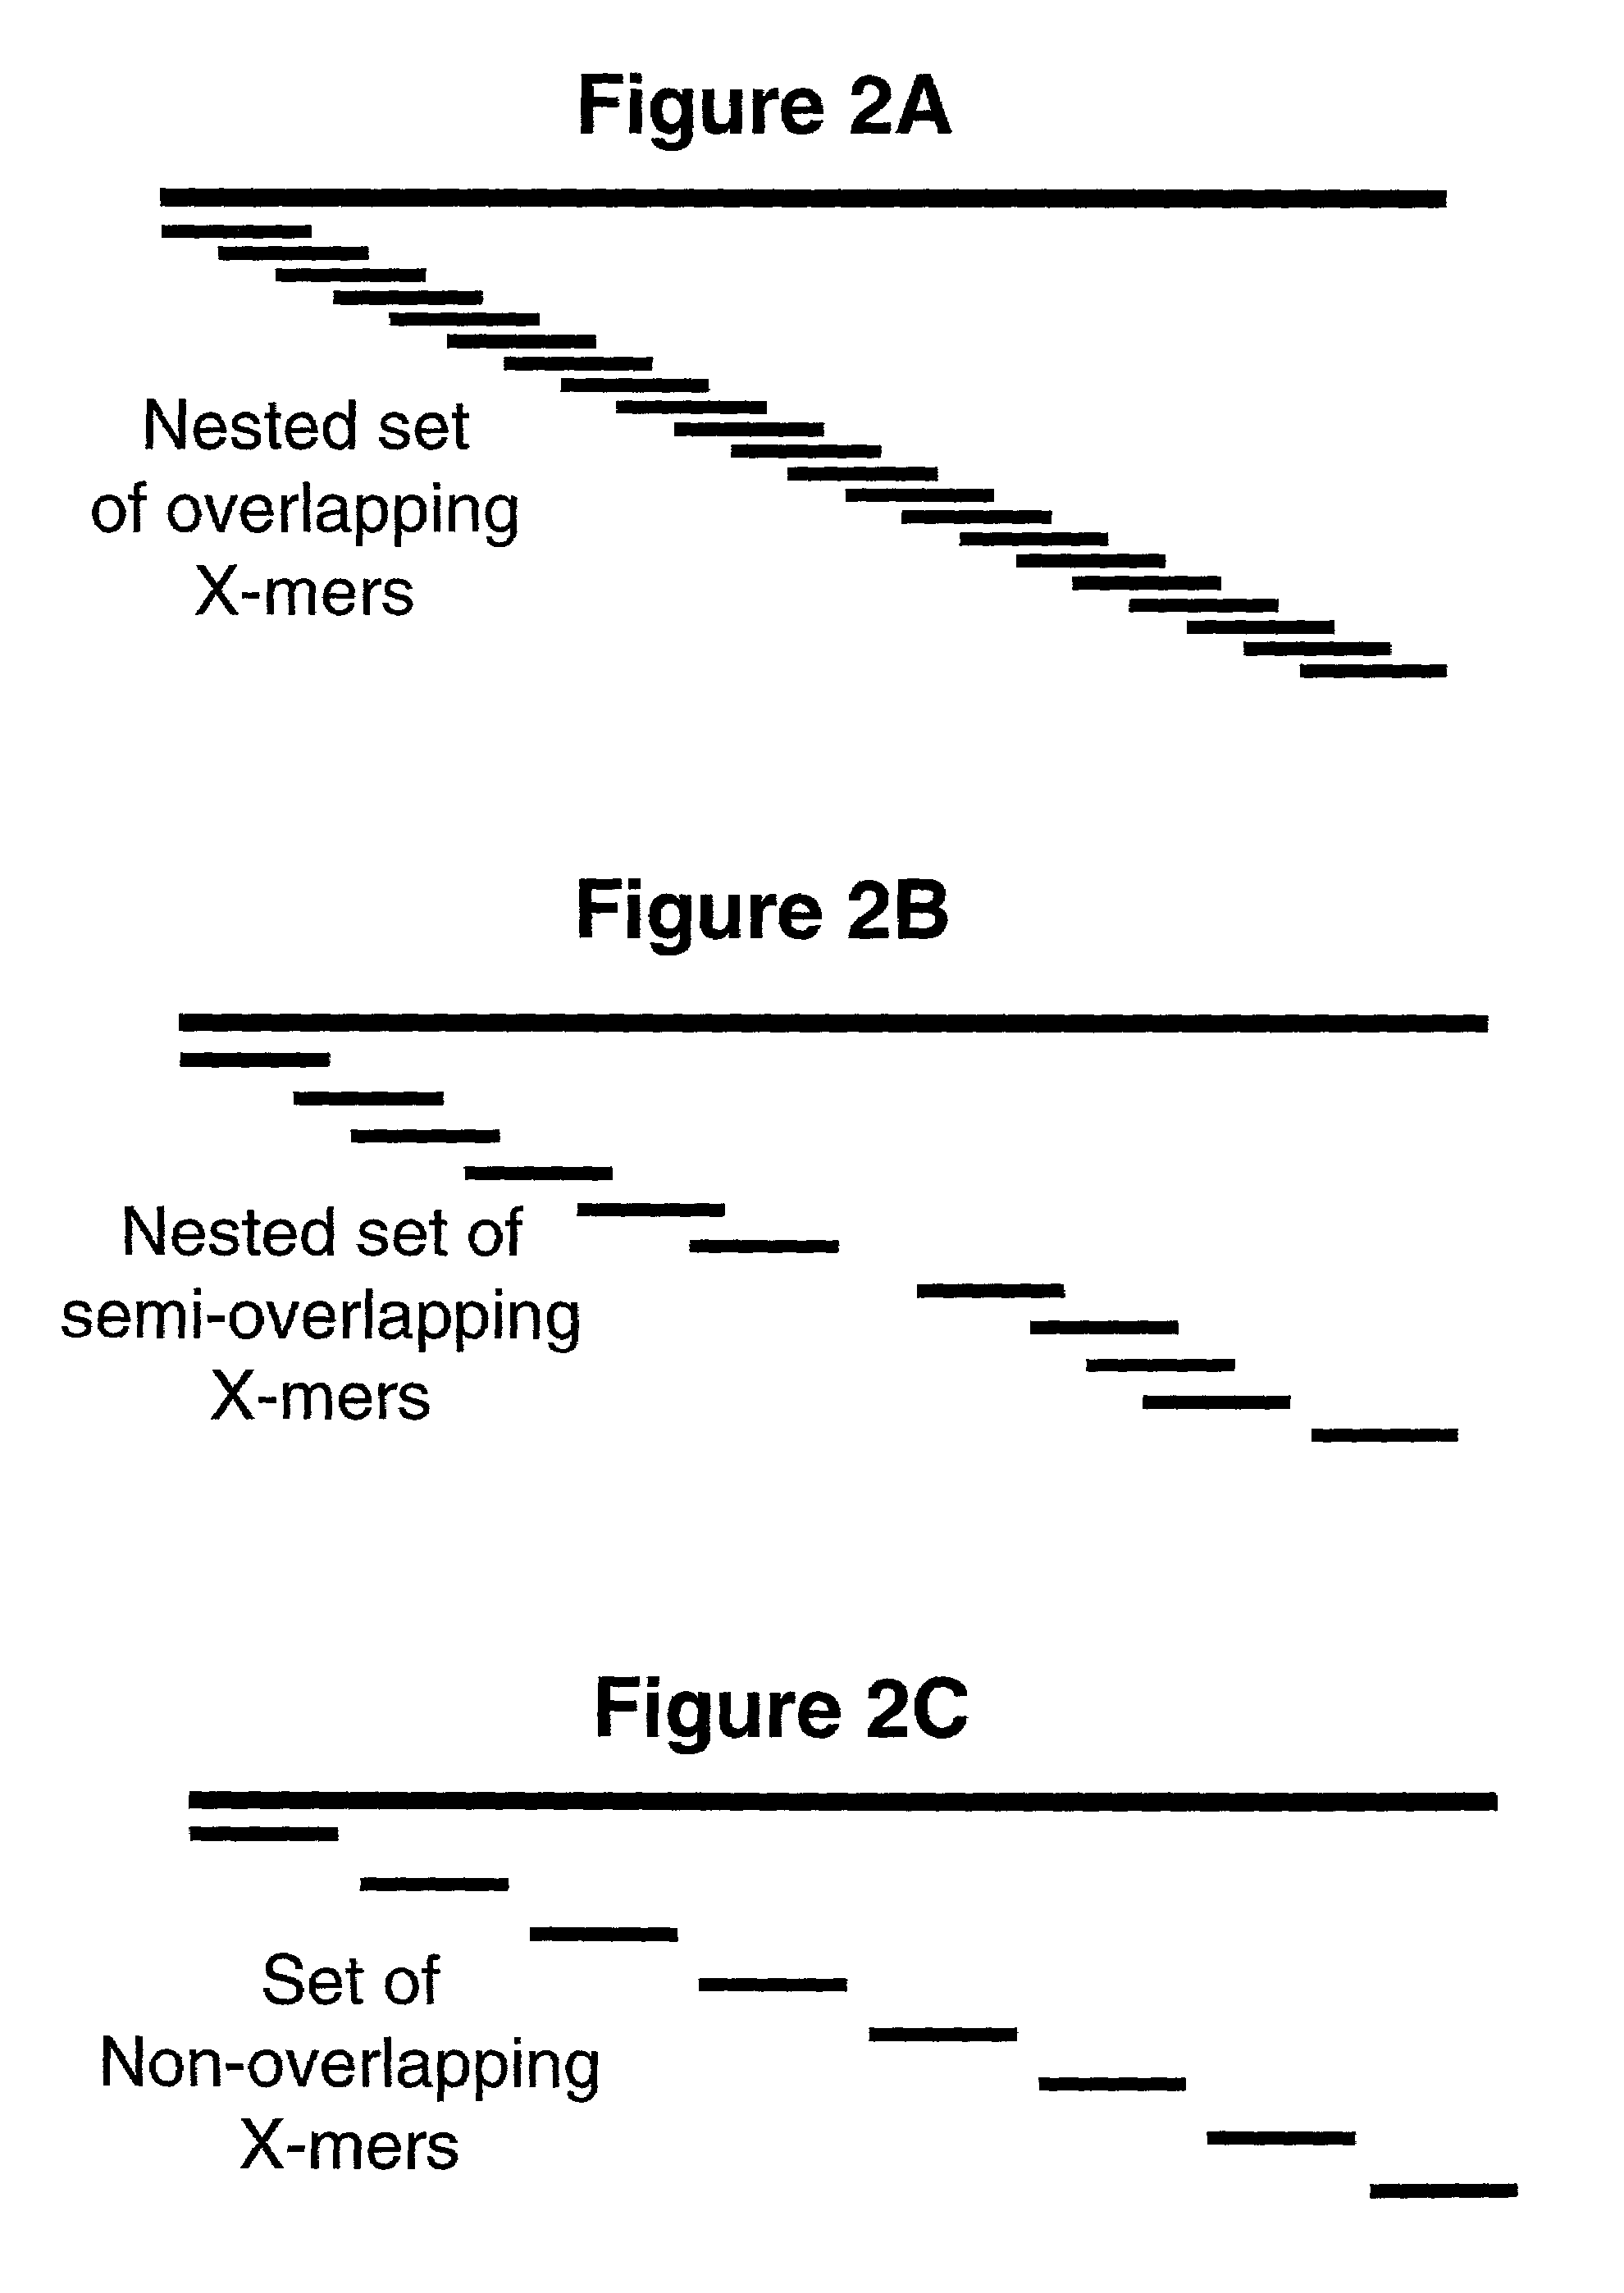 Method and reagents for analyzing the nucleotide sequence of nucleic acids